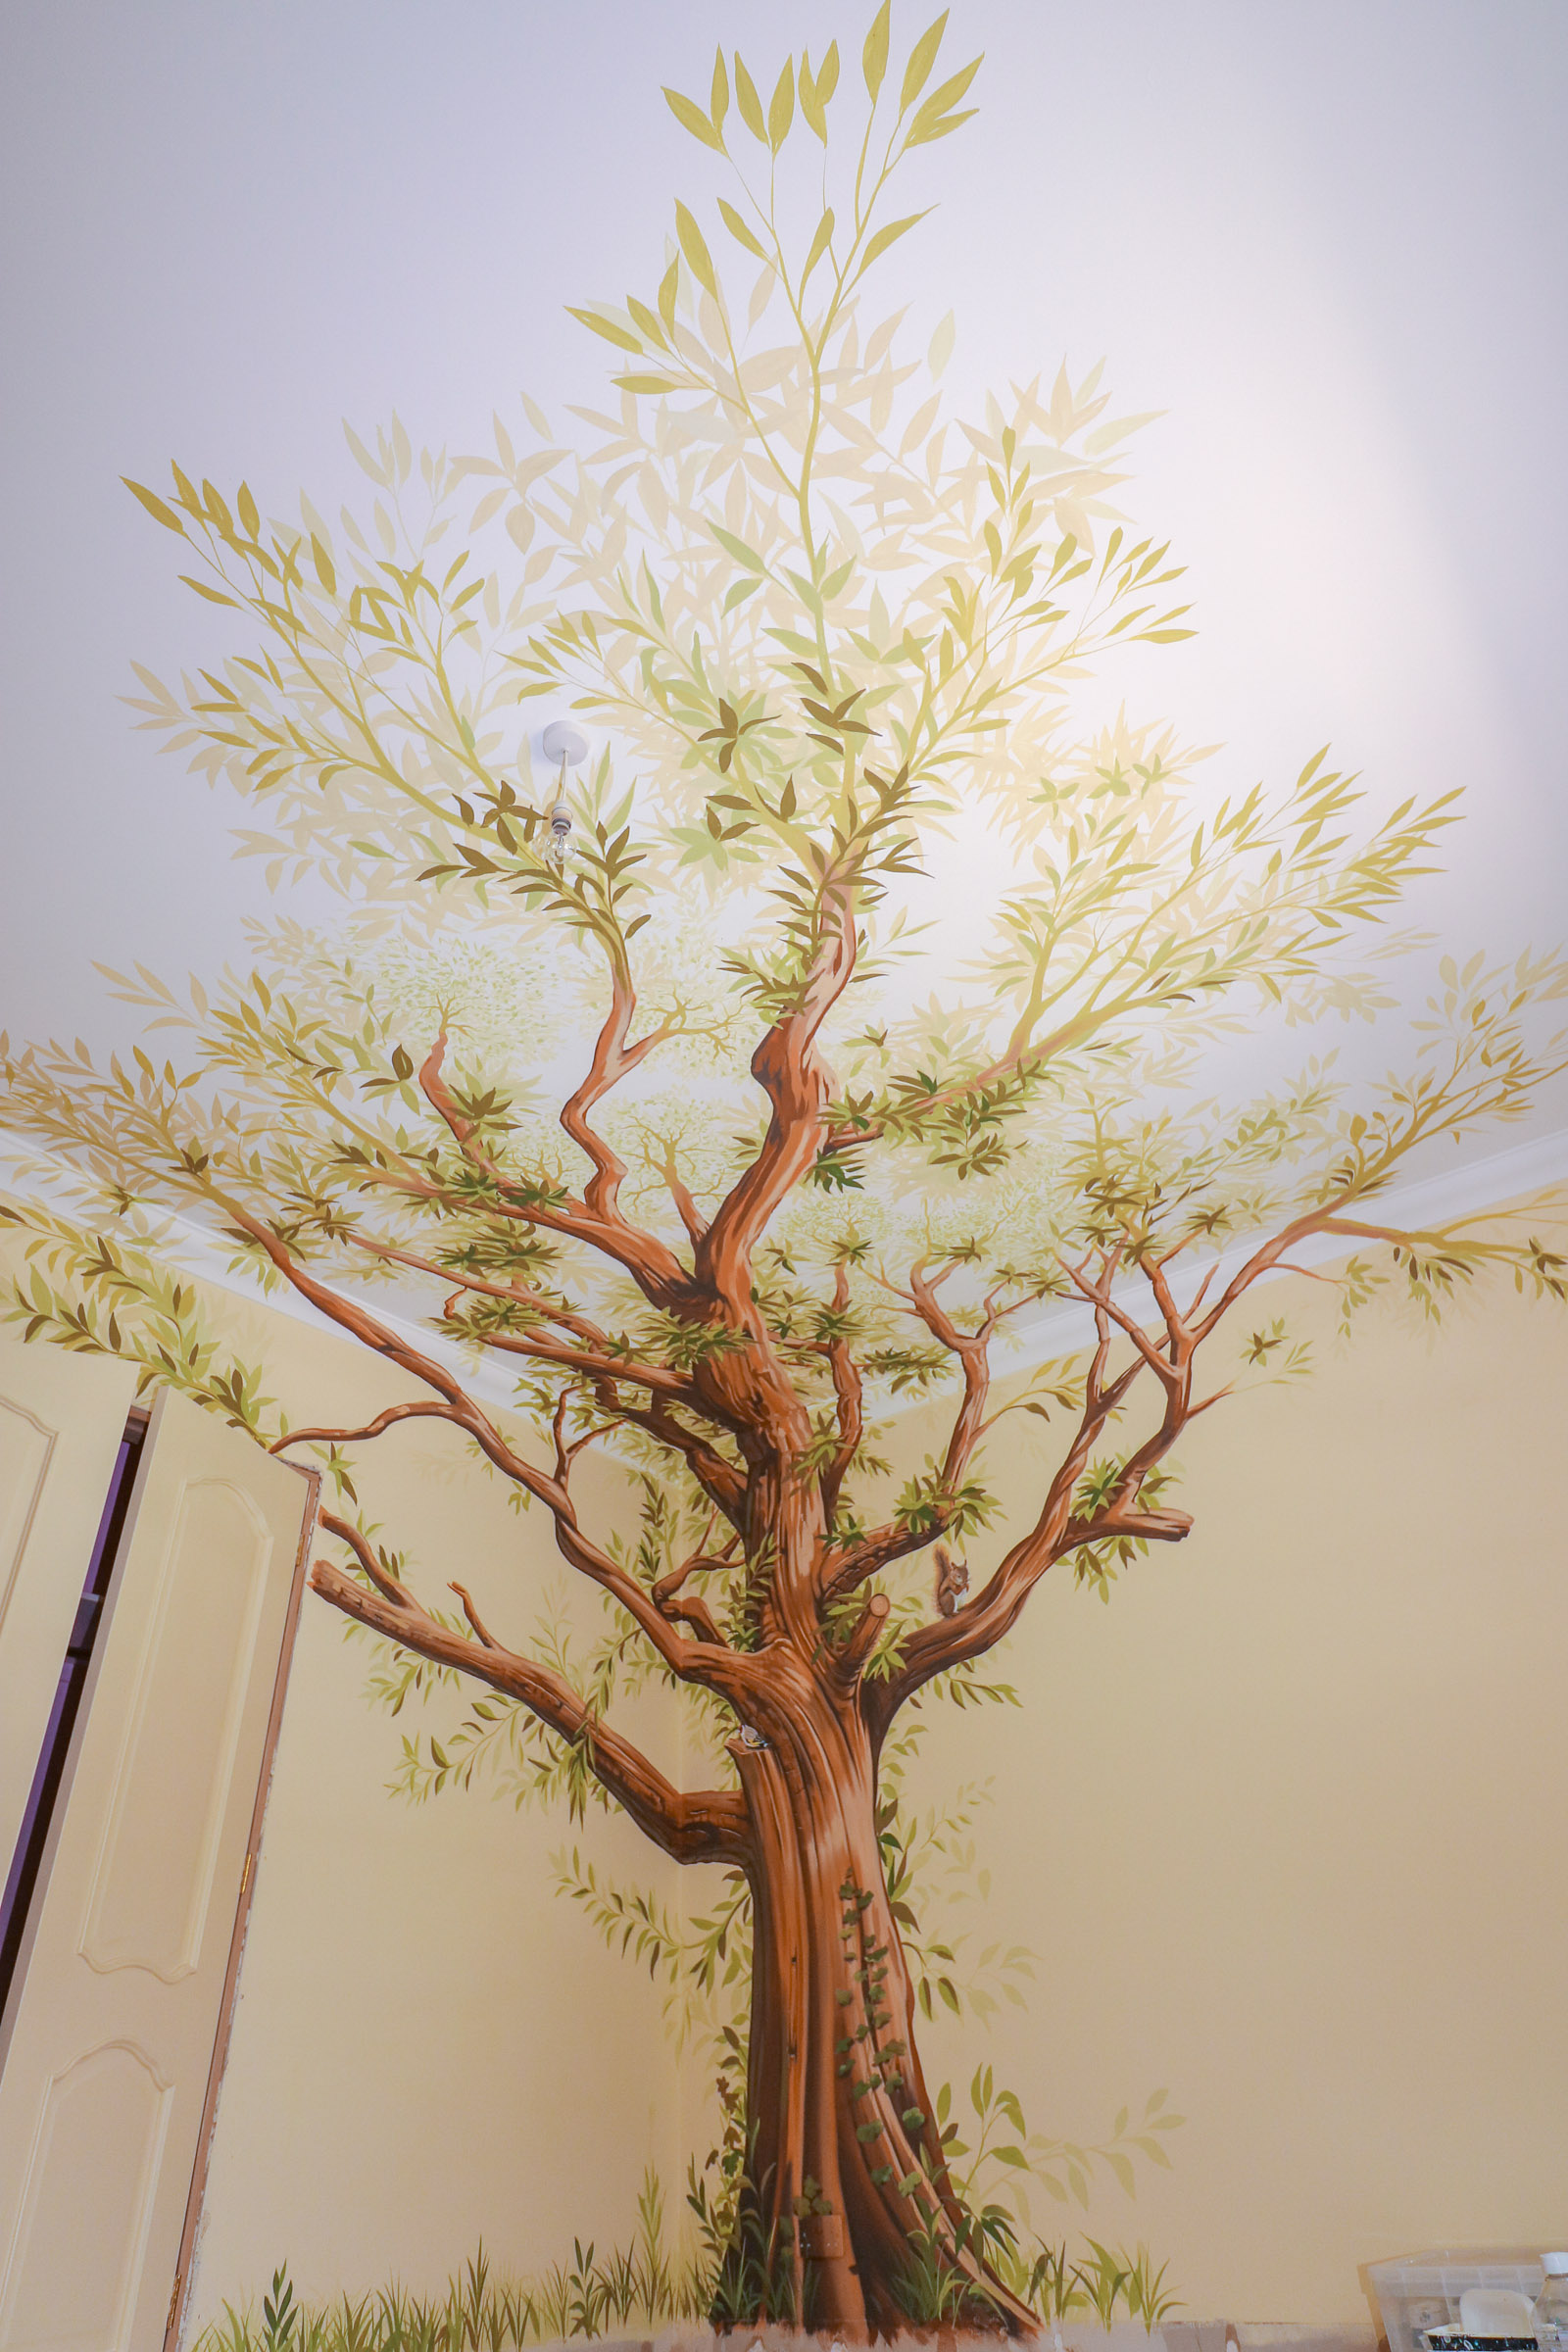 Wonderful tree mural painted on the walls and ceiling in this bedroom decoration idea